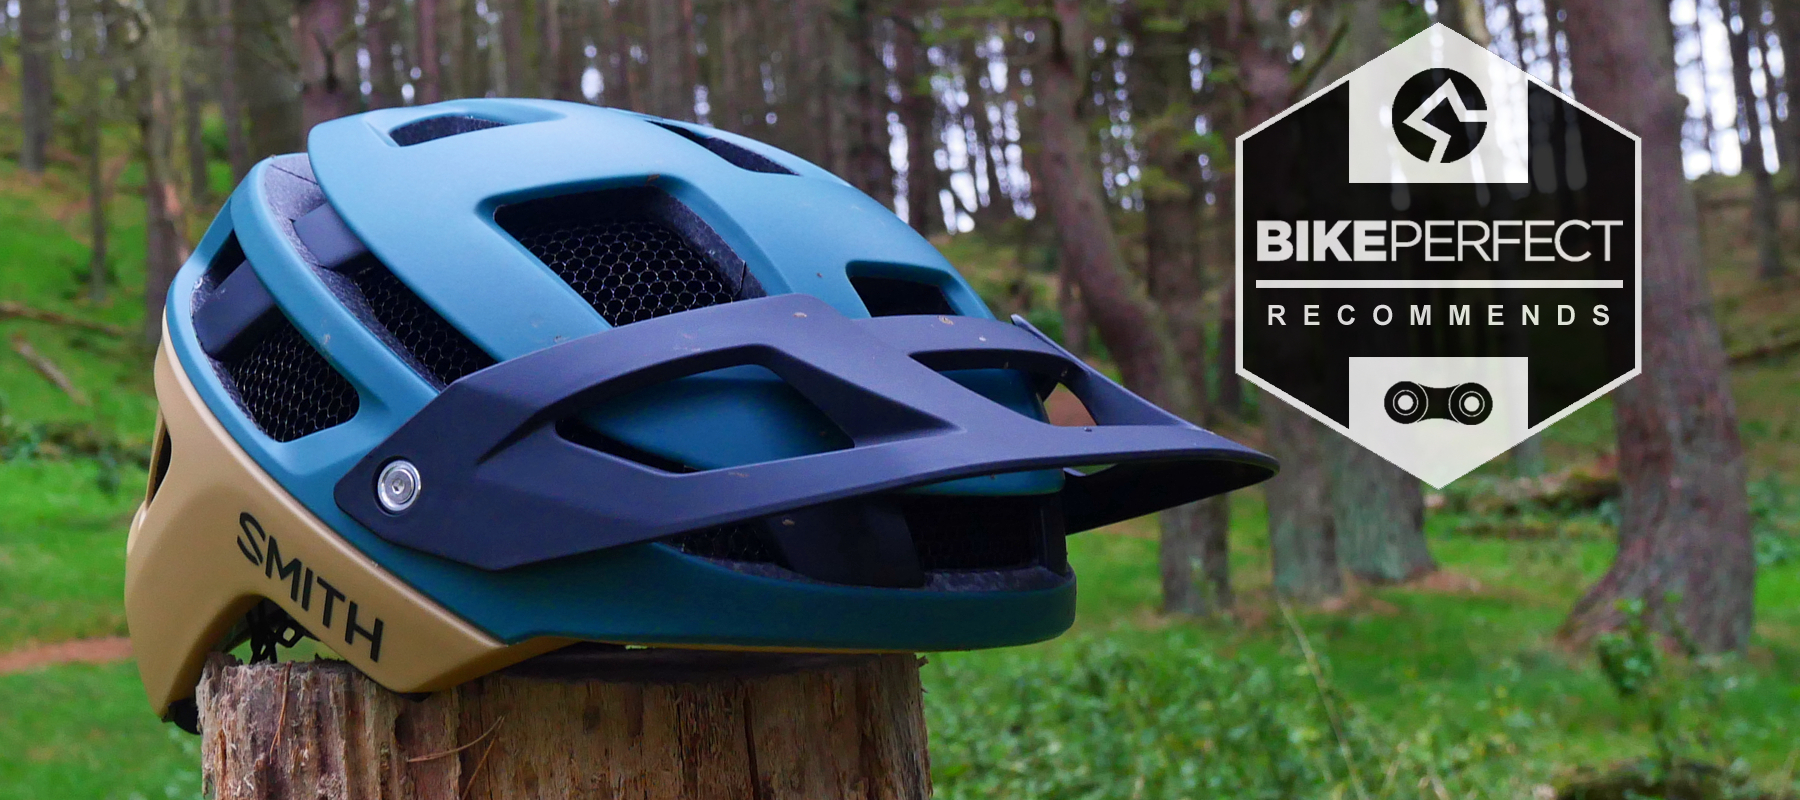 Smith Forefront 2 helmet review – feature-packed Koroyd trail lid